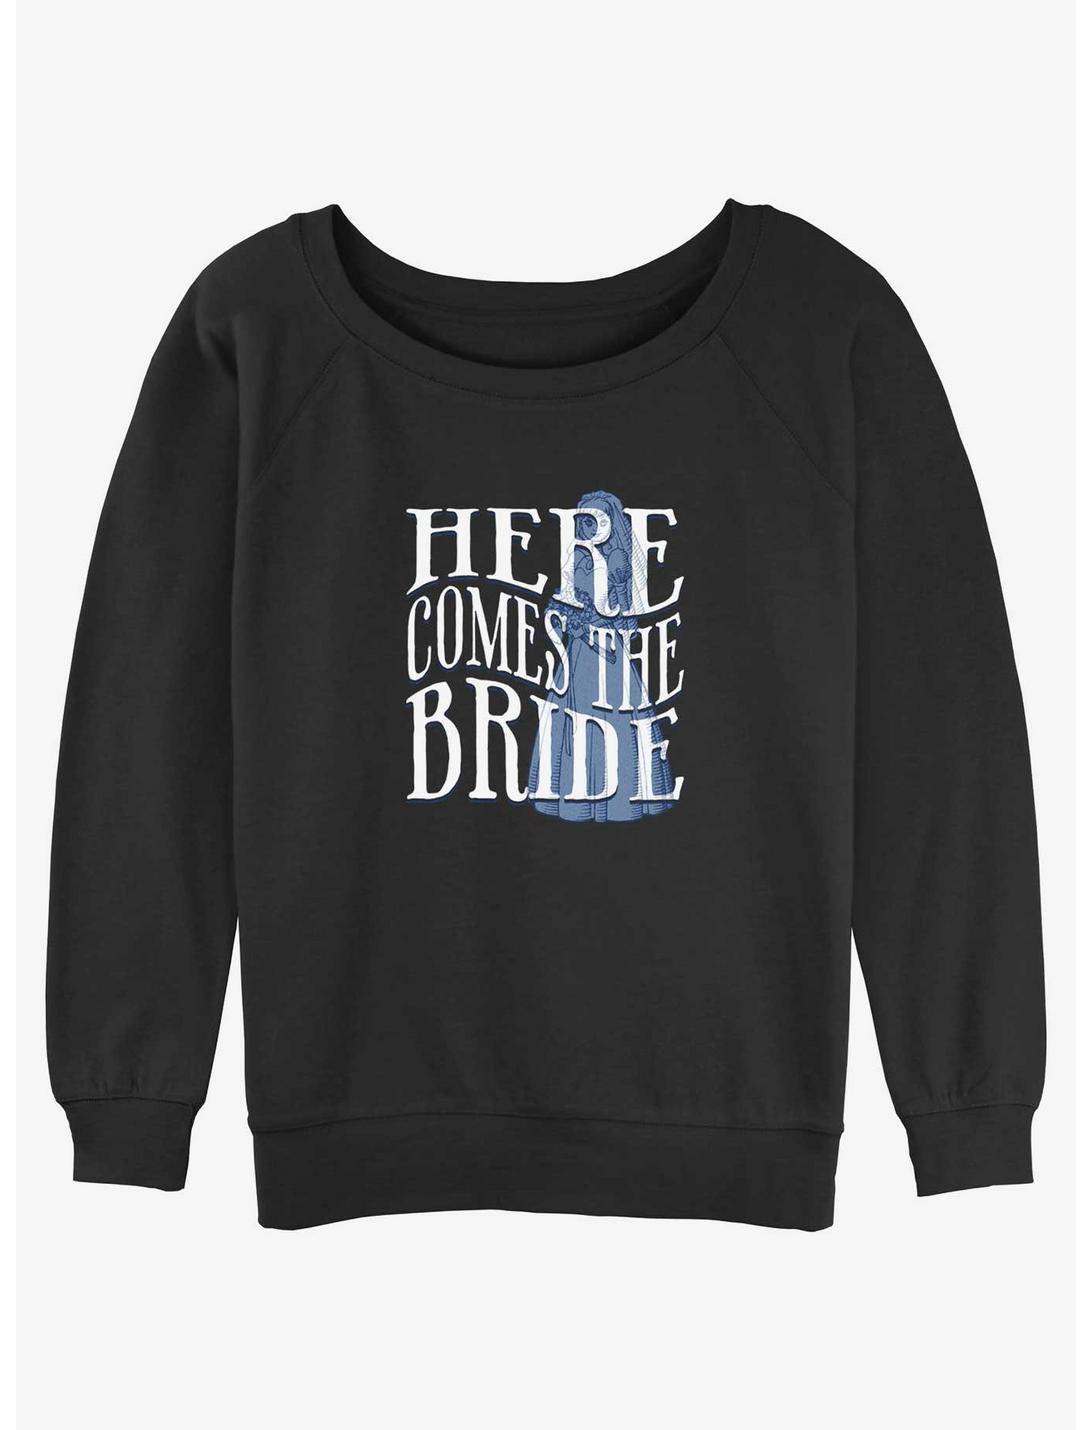 Disney Haunted Mansion Here Comes The Ghost Bride Womens Slouchy Sweatshirt, BLACK, hi-res